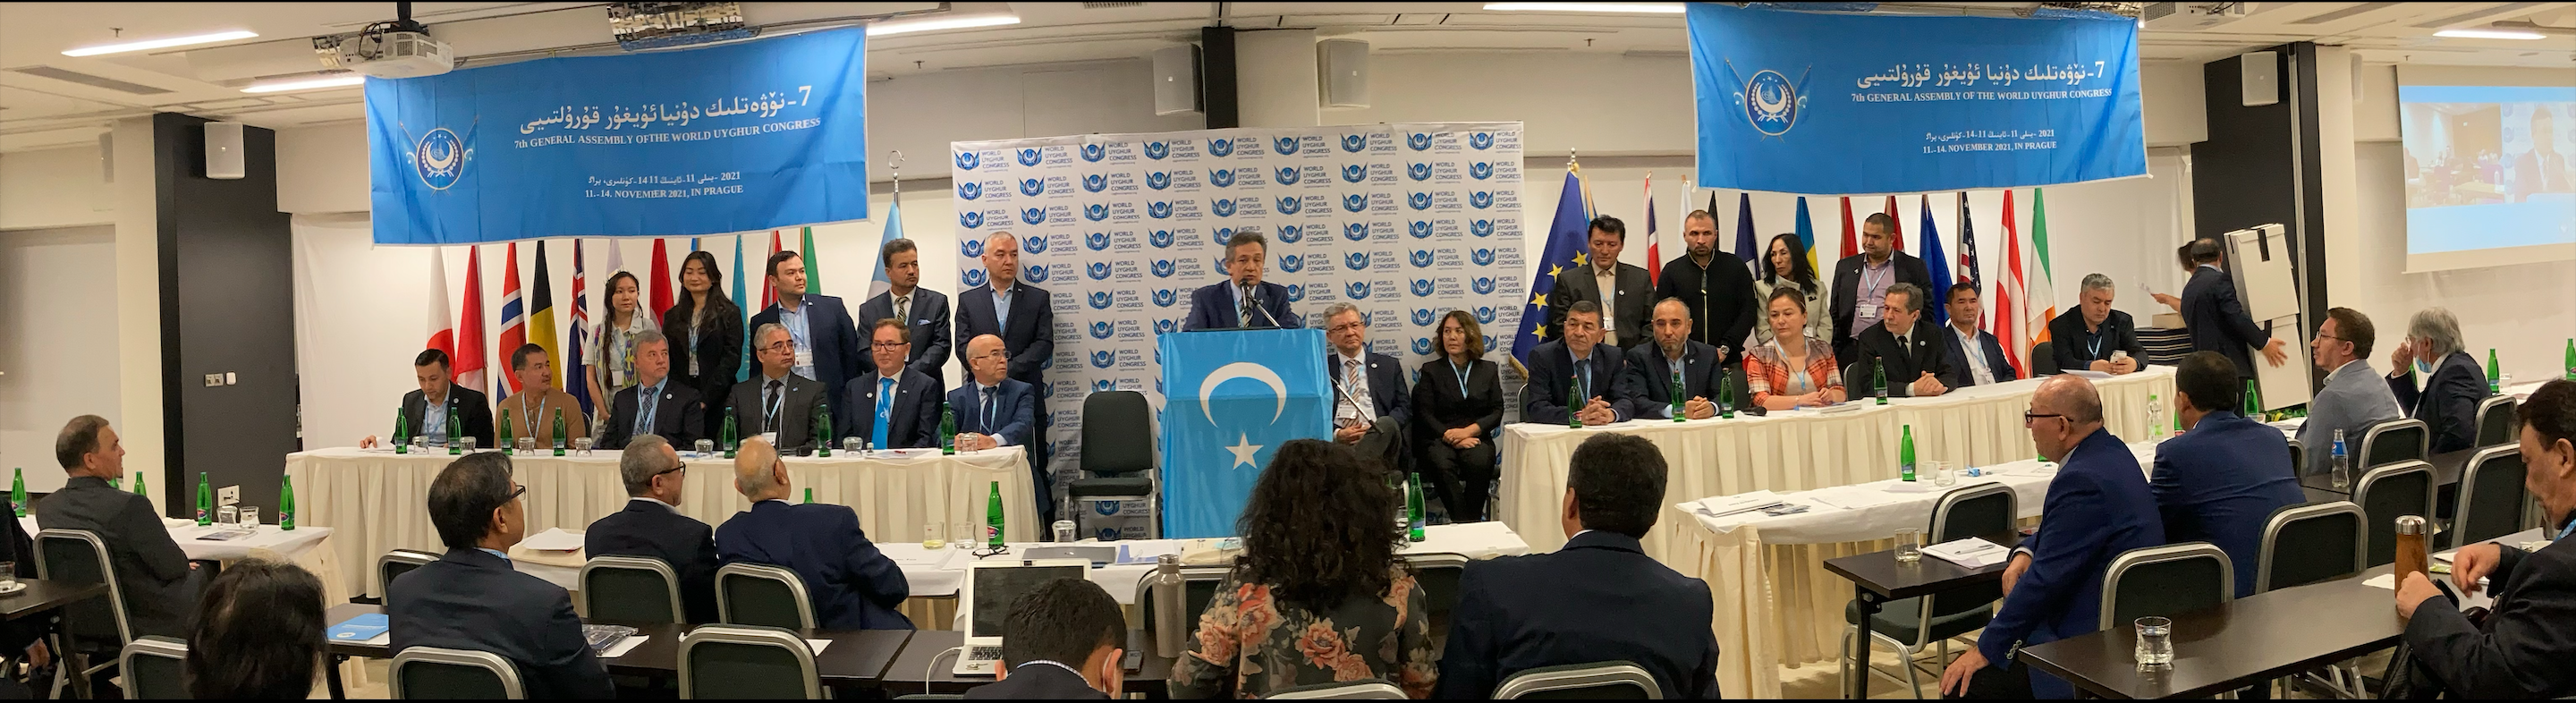 PRESS RELEASE: WORLD UYGHUR CONGRESS ELECTS NEW LEADERSHIP